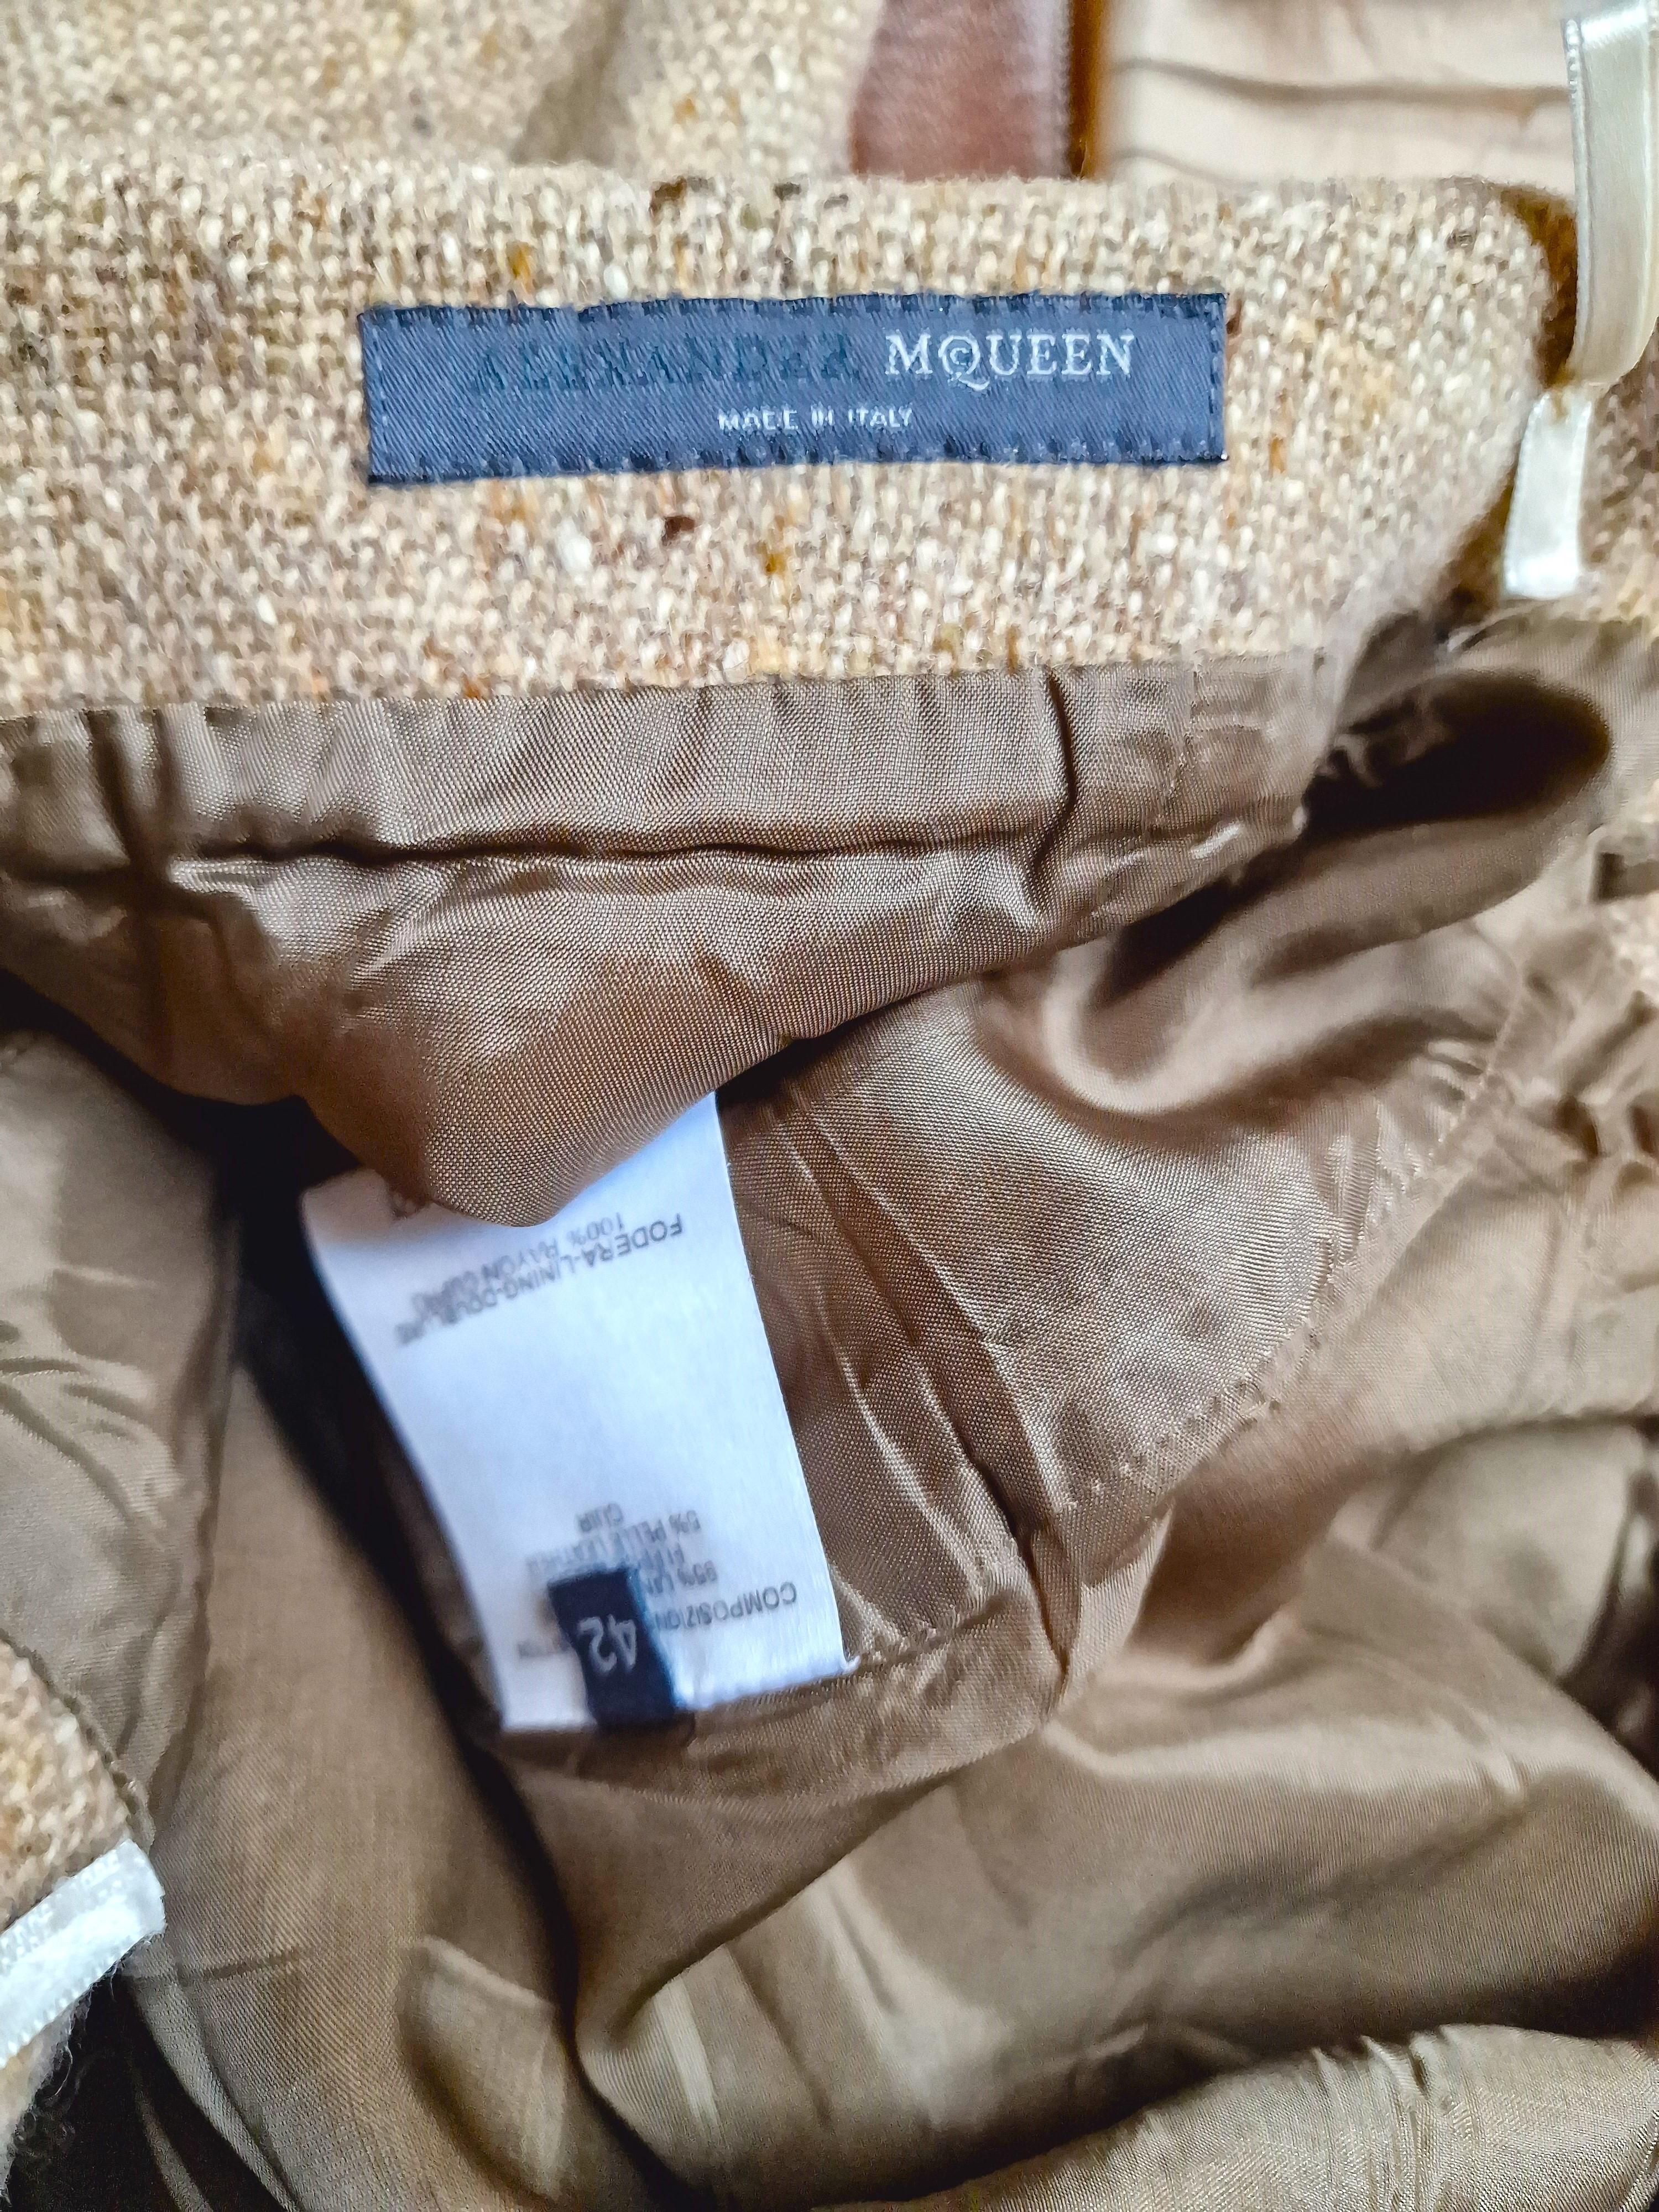 Early Alexander McQueen Tweed Wool Leather Beige S/S 2003 Irere Collection Skirt For Sale 10